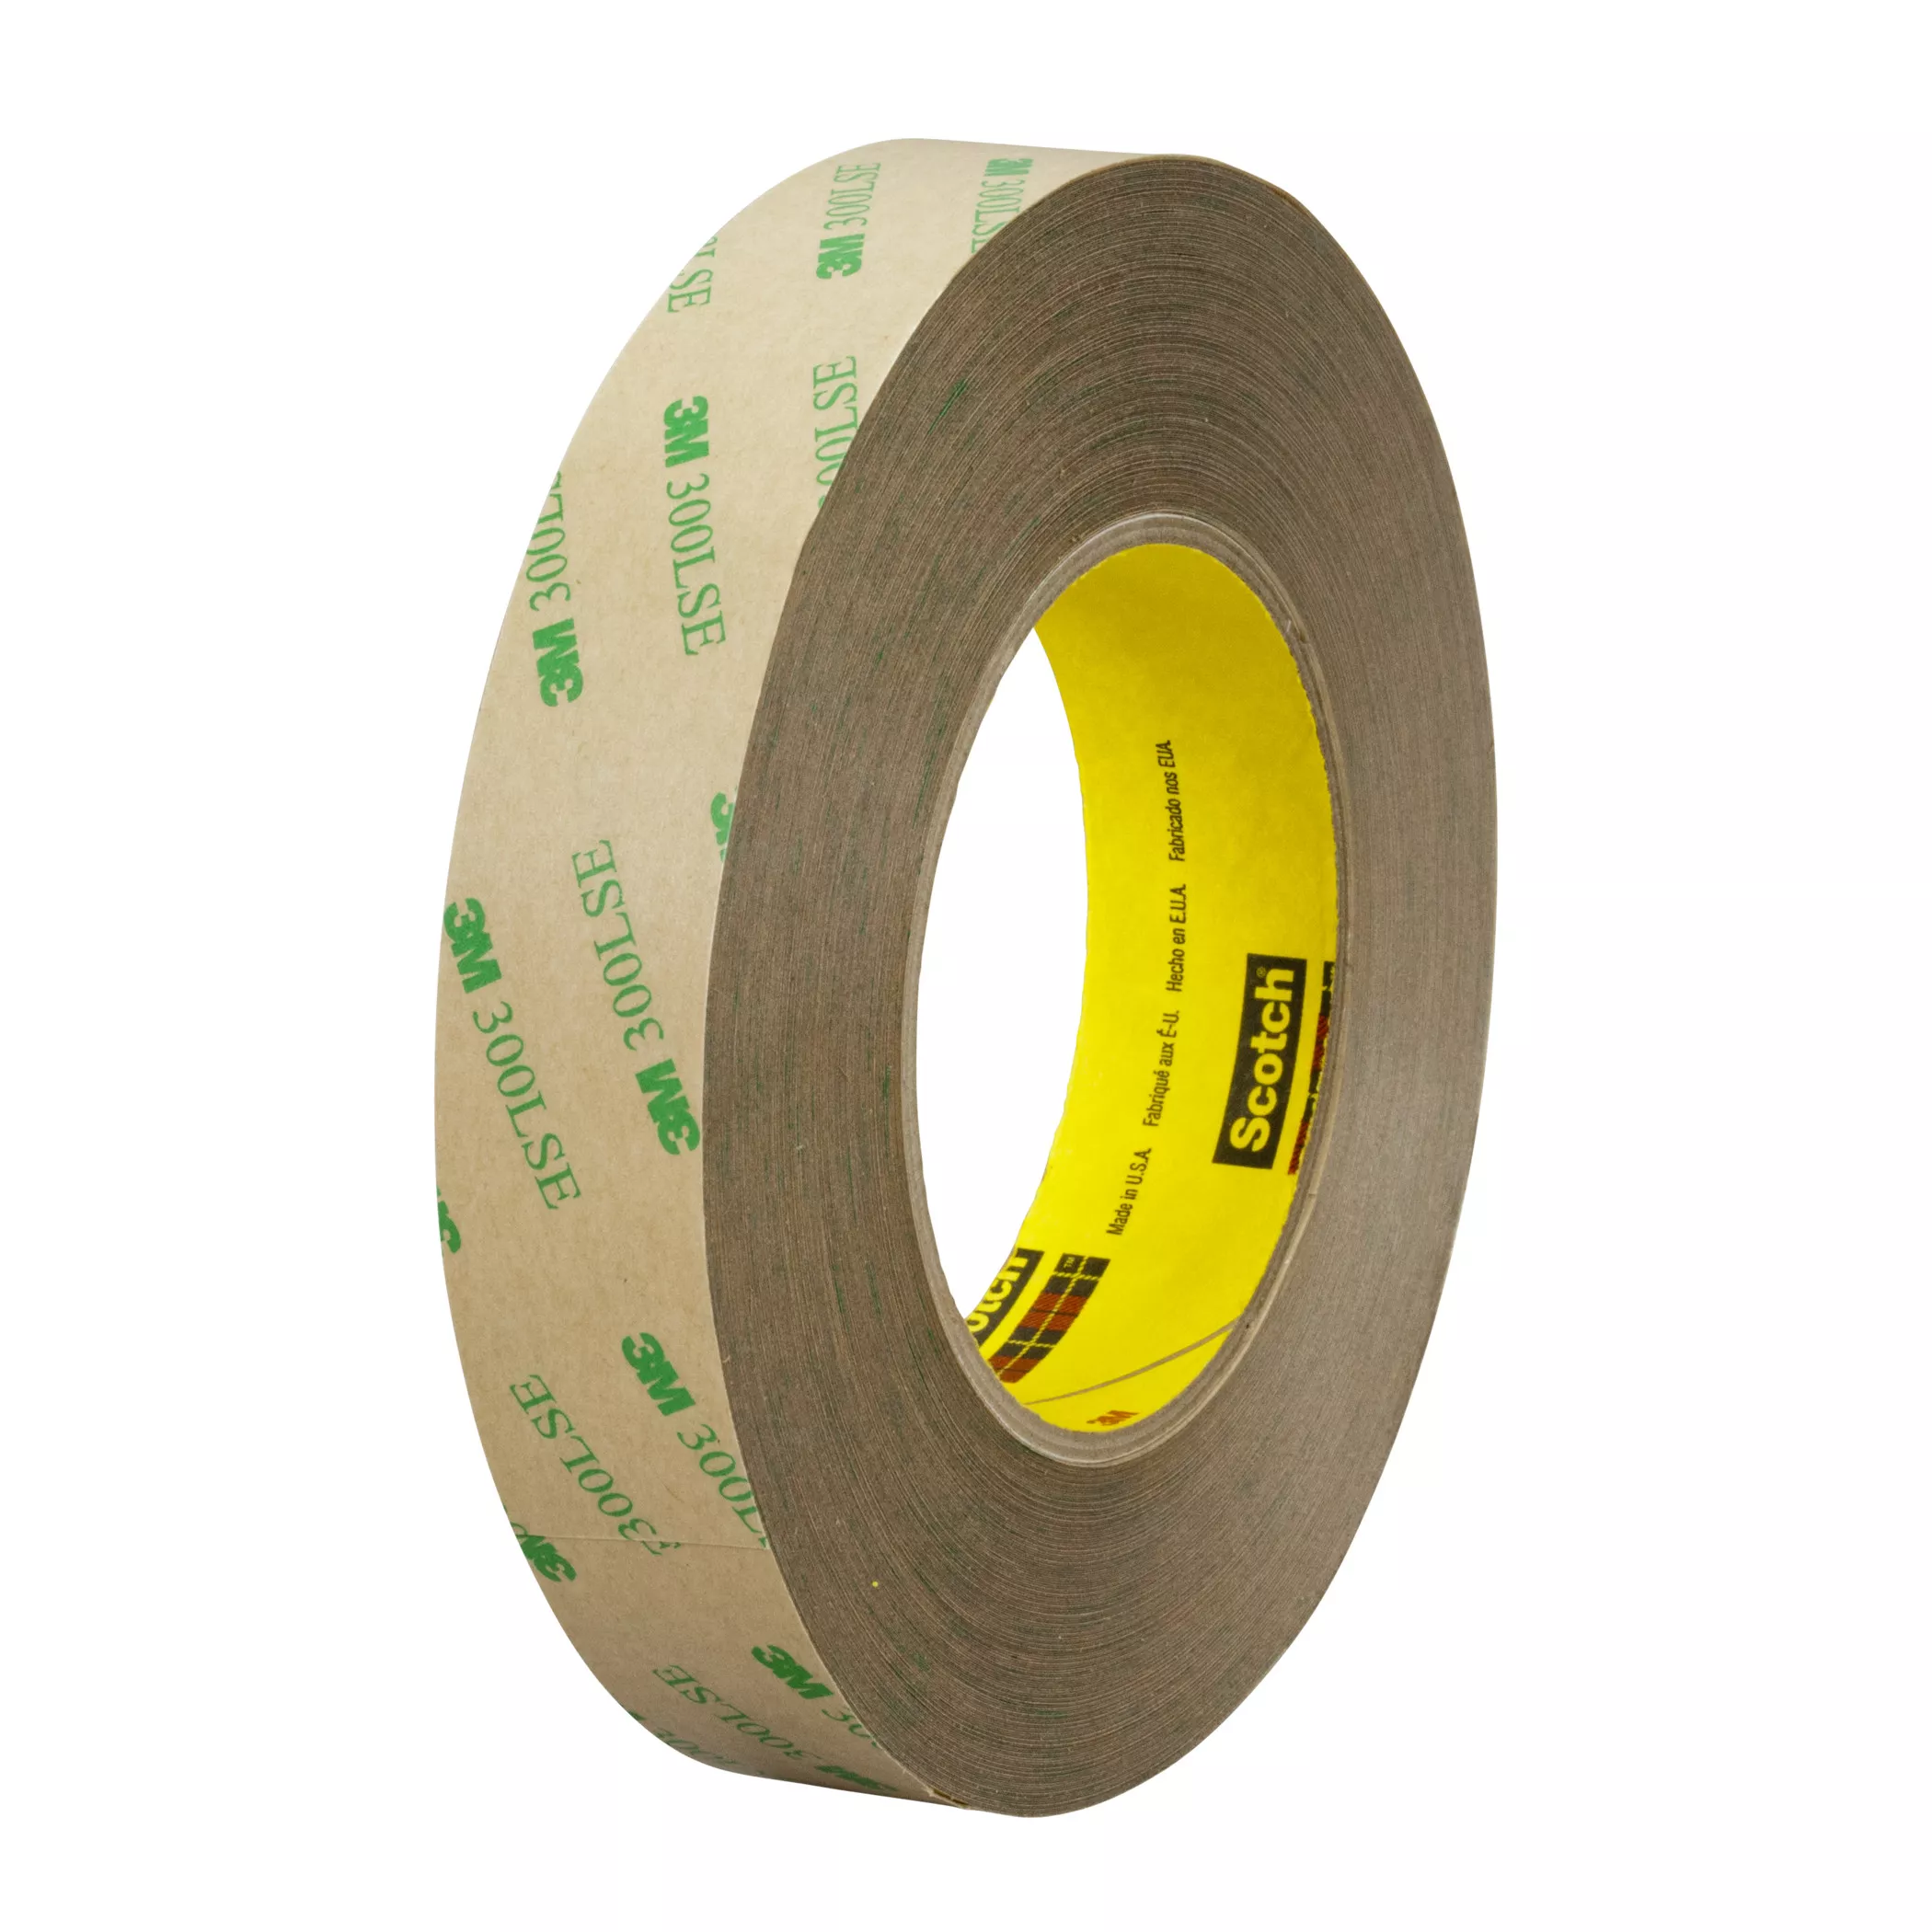 3M™ Double Coated Tape 93010LE, Clear, 54 in x 180 yd, 3.9 mil, 1
Roll/Case